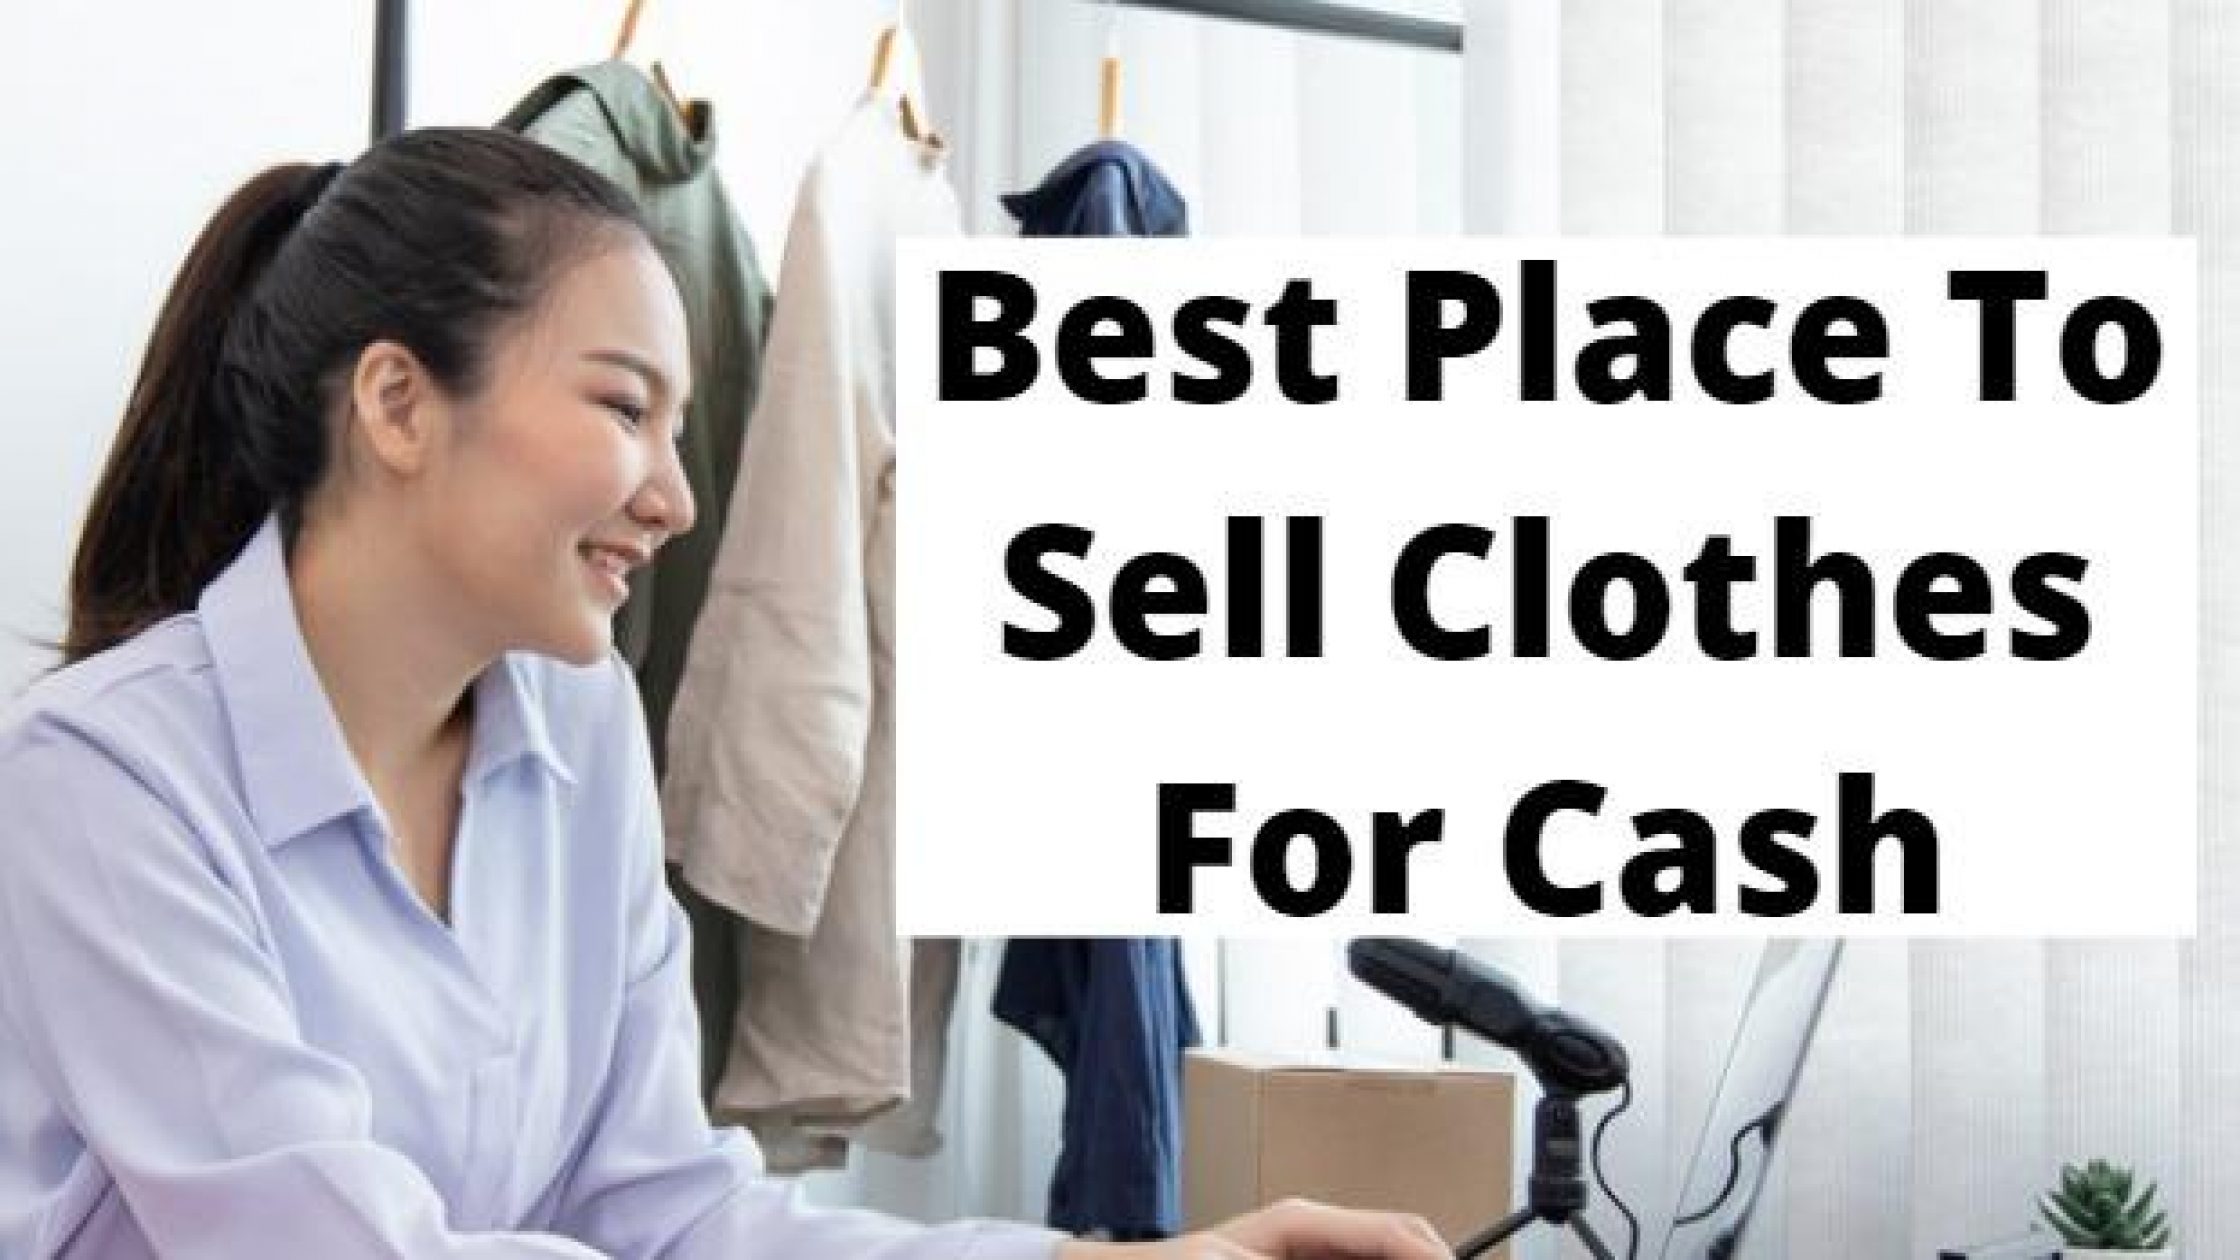 18 Best Place To Sell Clothes For Cash + 8 Tips To Sell